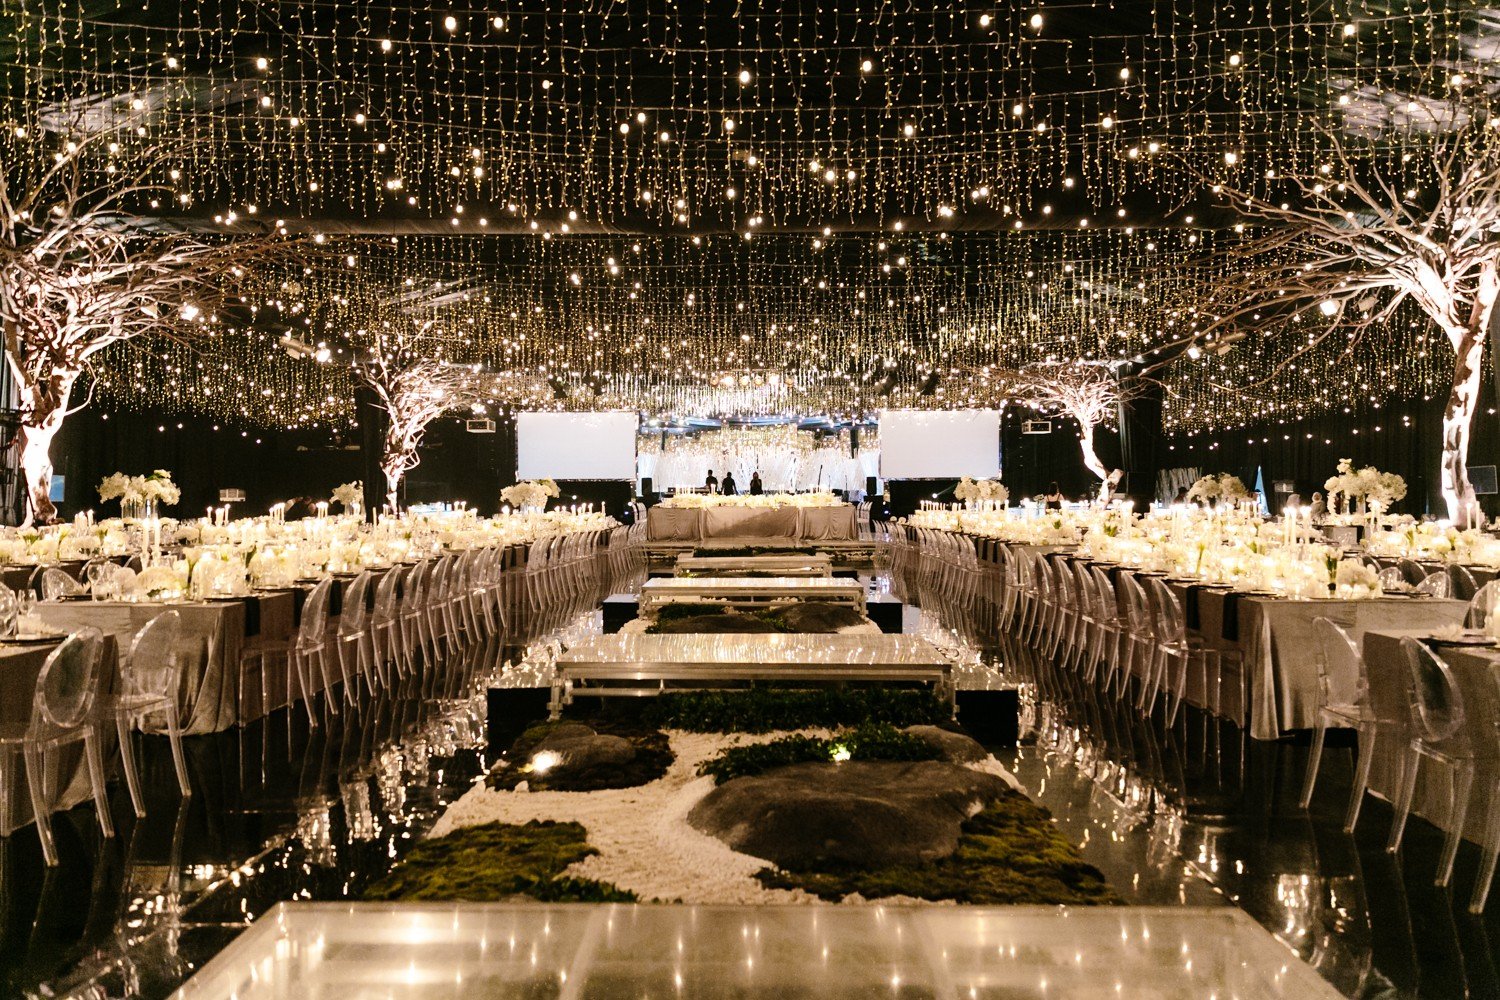 The wedding reception at Alila Uluwatu was held in an air-conditioned tent with its own zen garden raised specially for the wedding. Photos: Erin & Tara